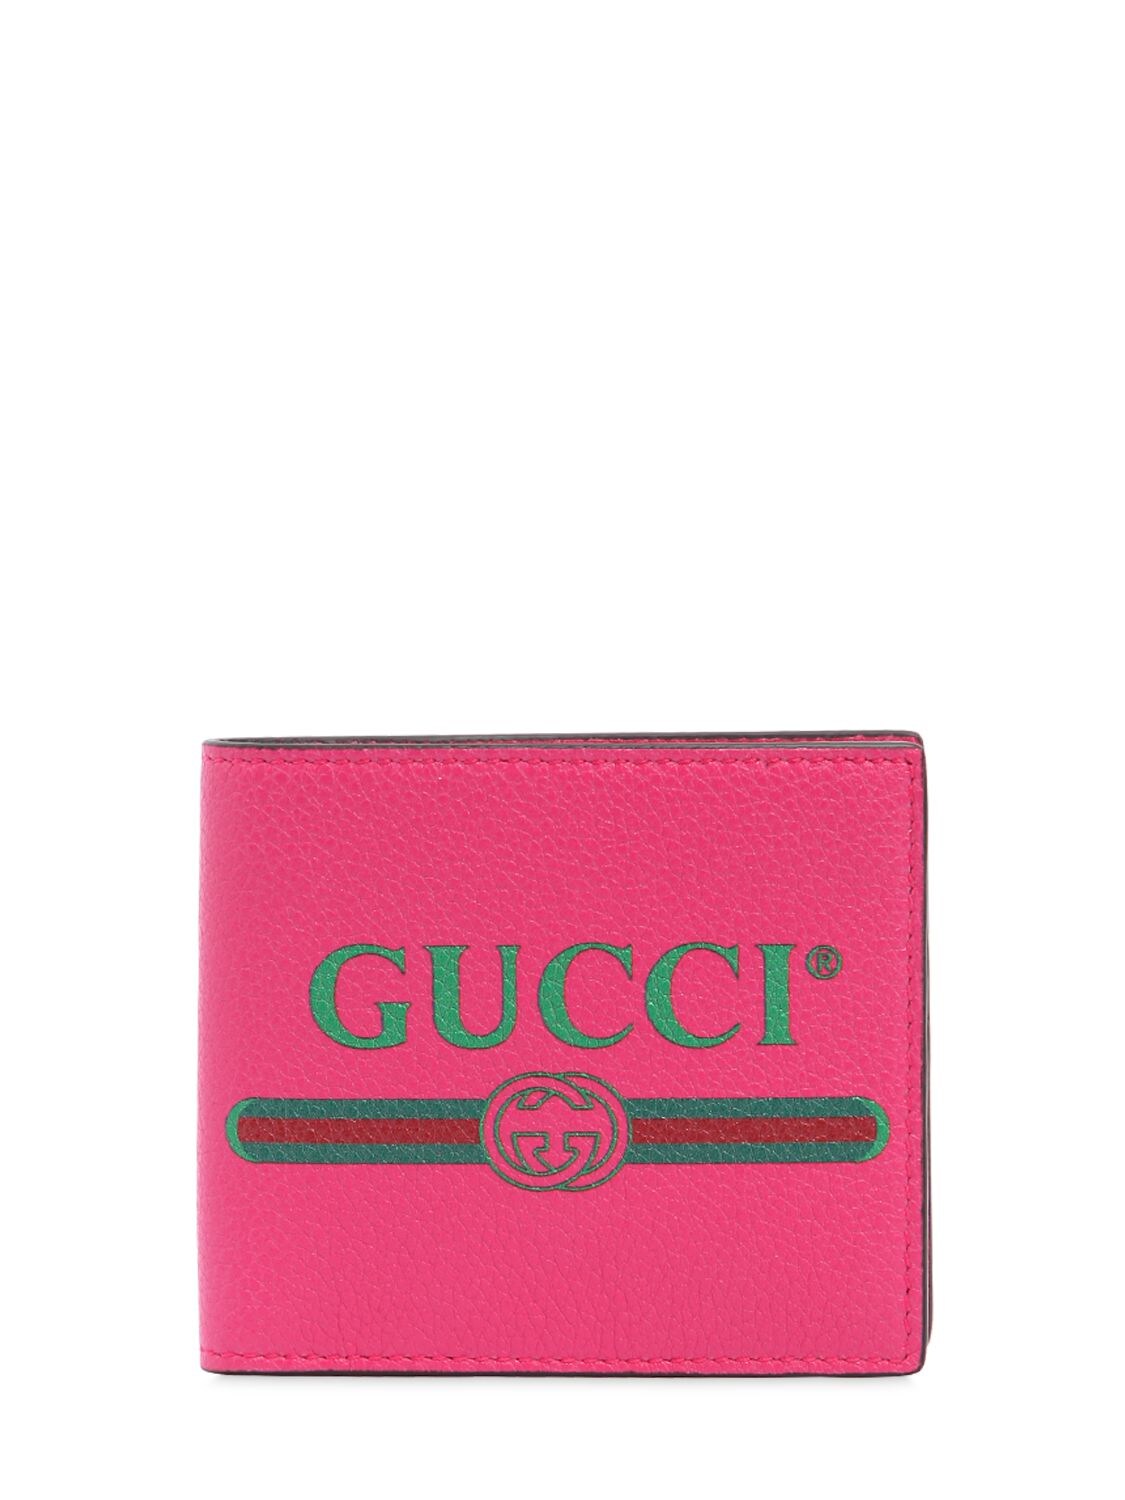 GUCCI GUCCI 1980'S PRINTED LEATHER WALLET,67IH0L020-ODg0MA2